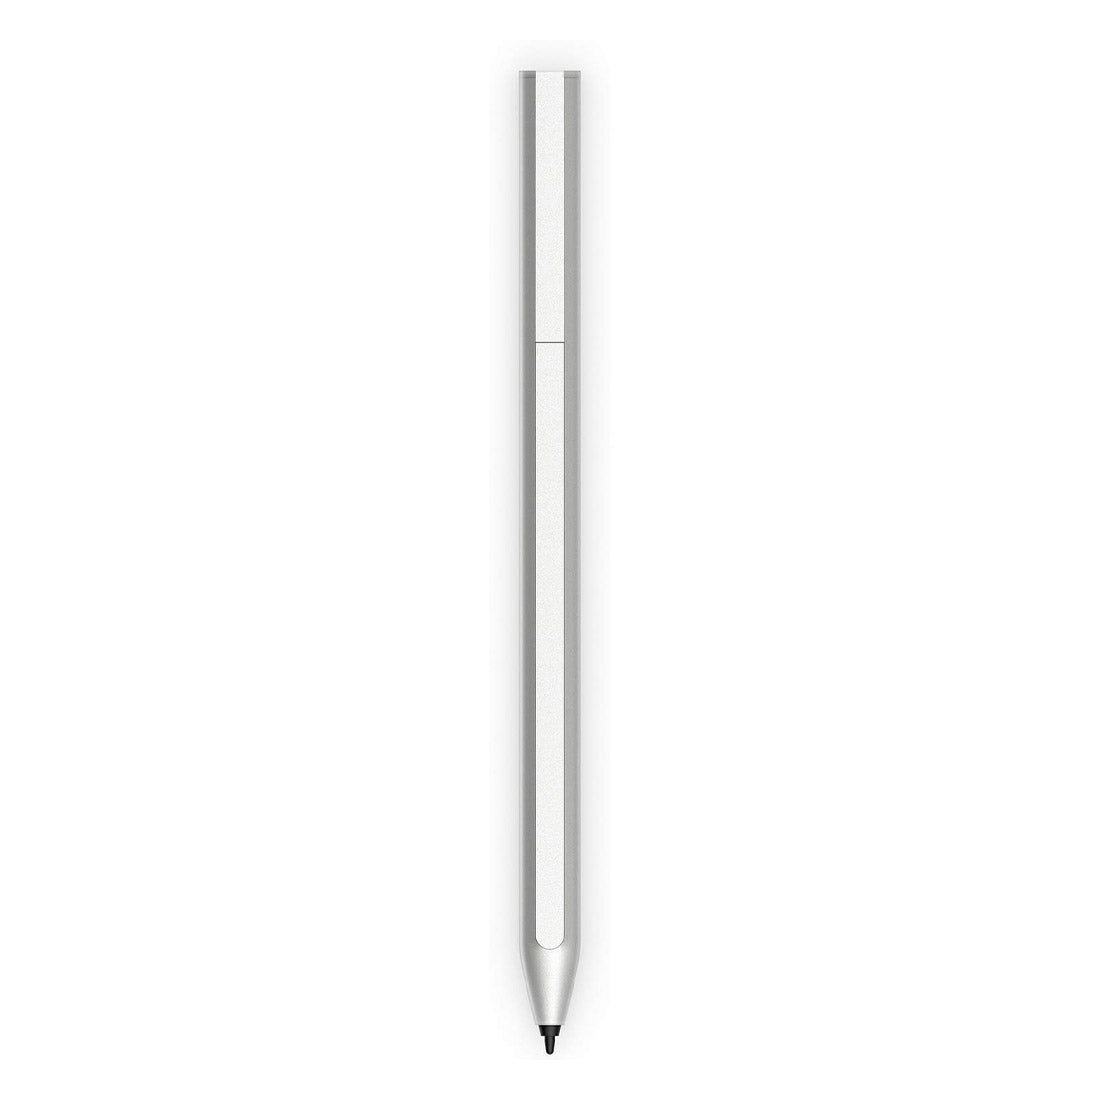 HP Rechargeable USI Pen for Inking Enabled USI Chromebook and Supported Devices